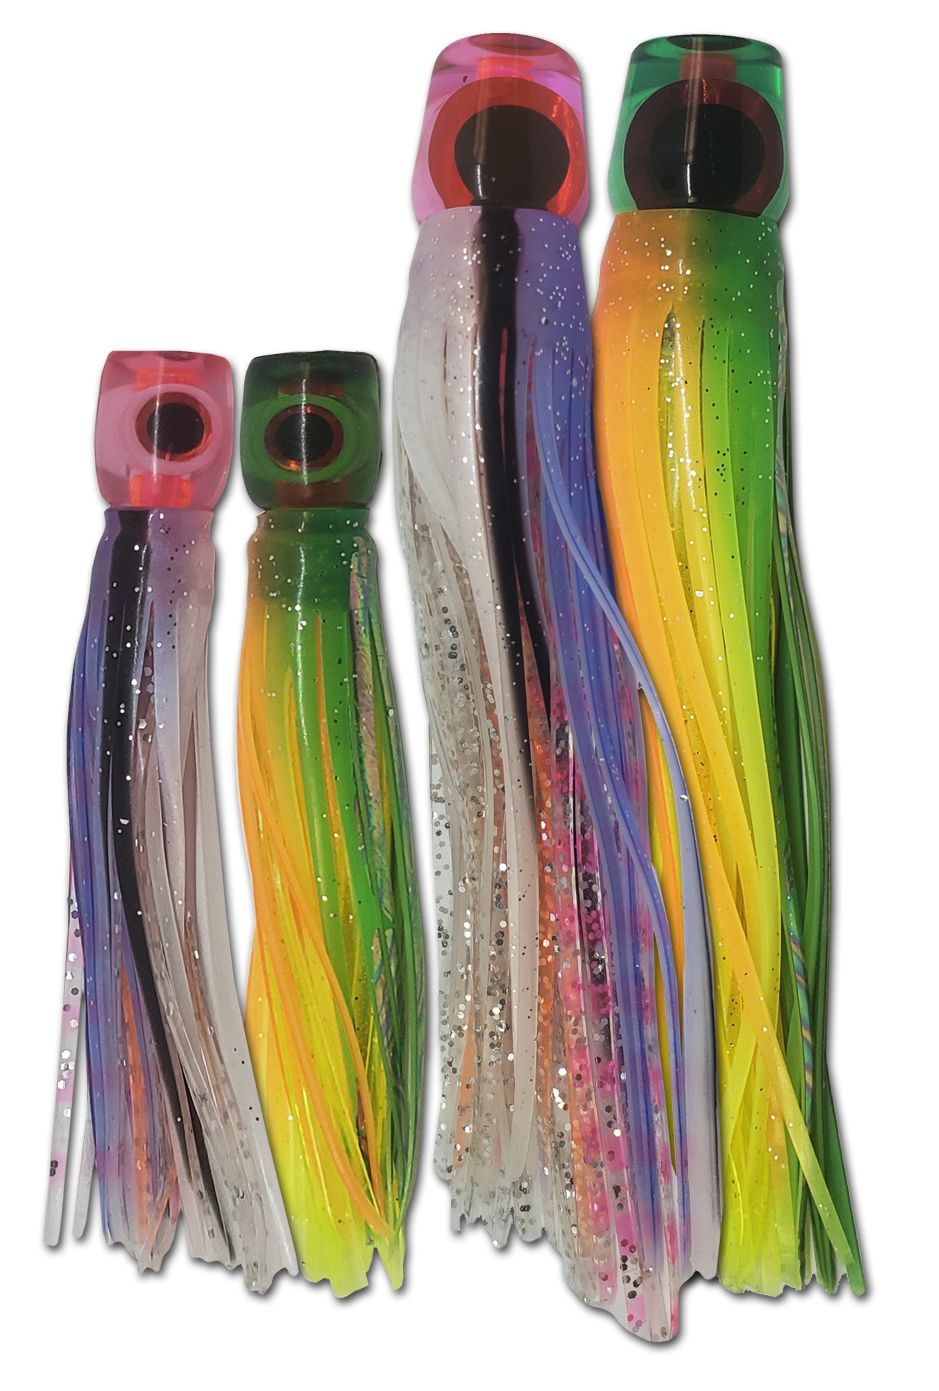 Soft Bait Lures, Mr. Softee Soft Head Lures